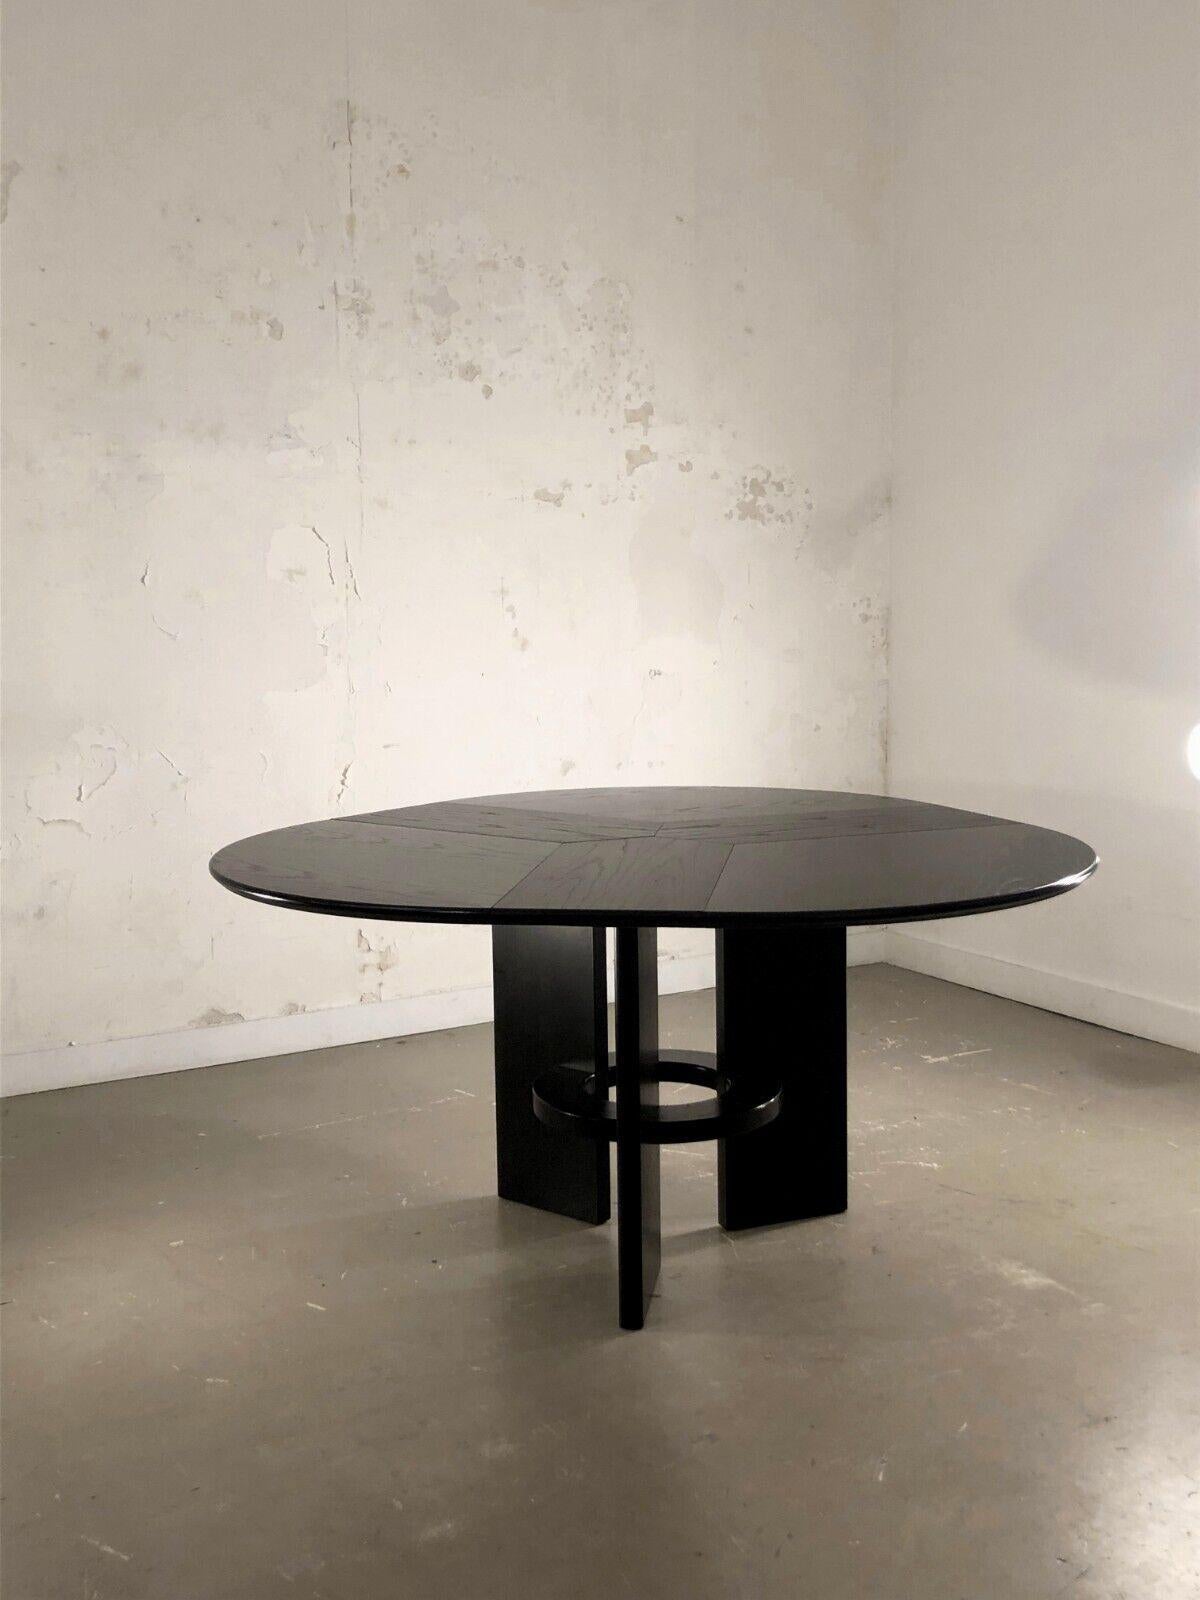 A spectacular dinner or conference table with 3 extensions; circular without extensions, organic 